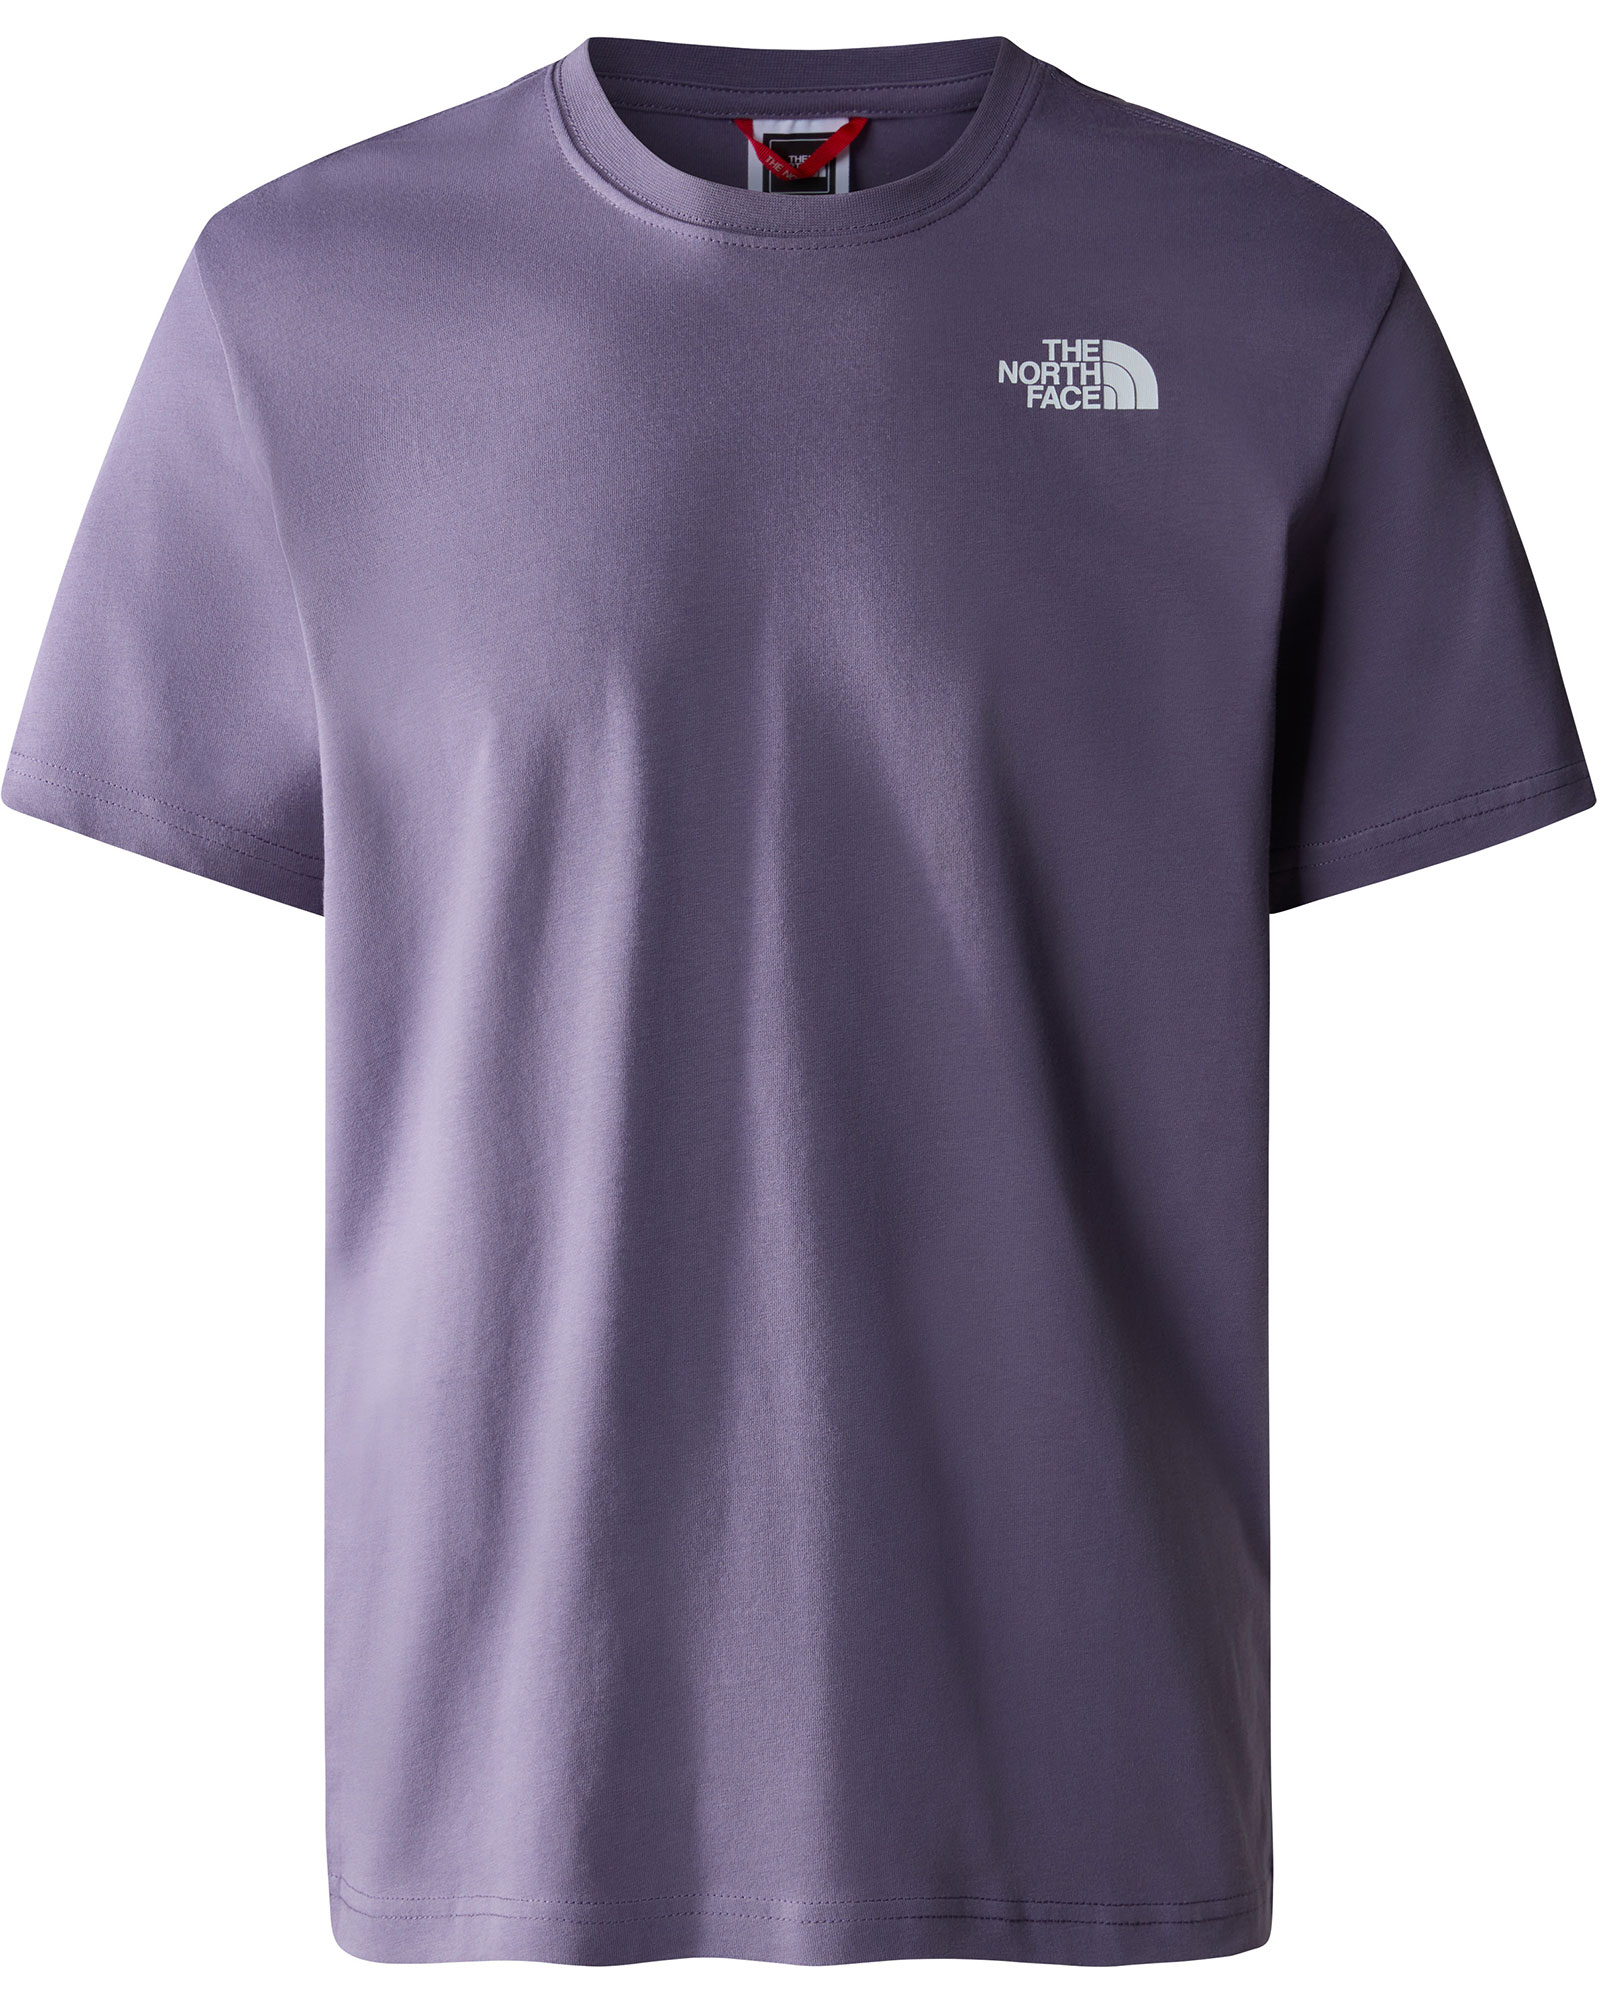 The North Face Red Box Men’s T Shirt - Lunar Slate M